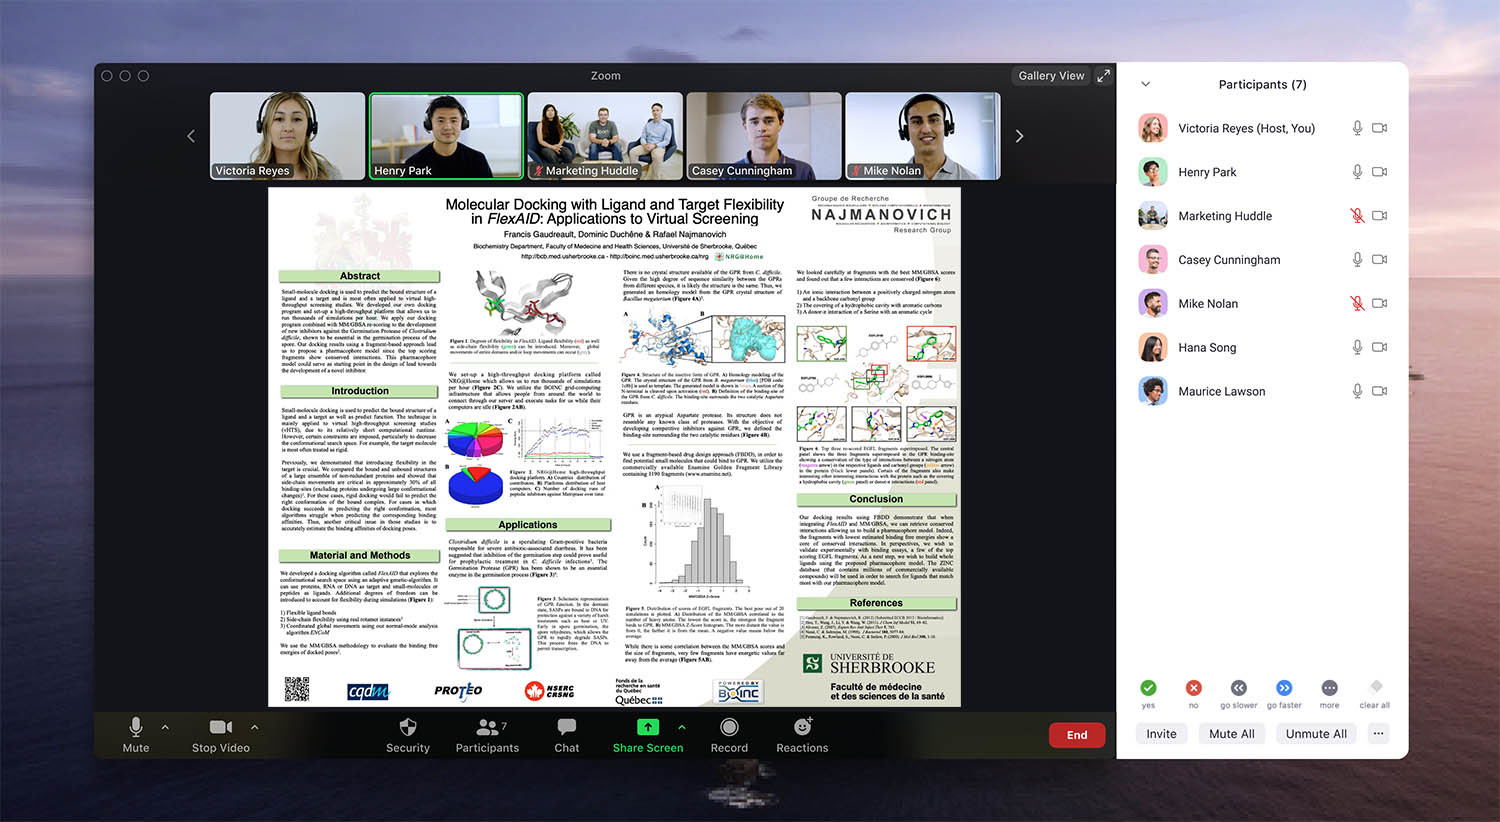 Virtual poster conversation on the Zoom app